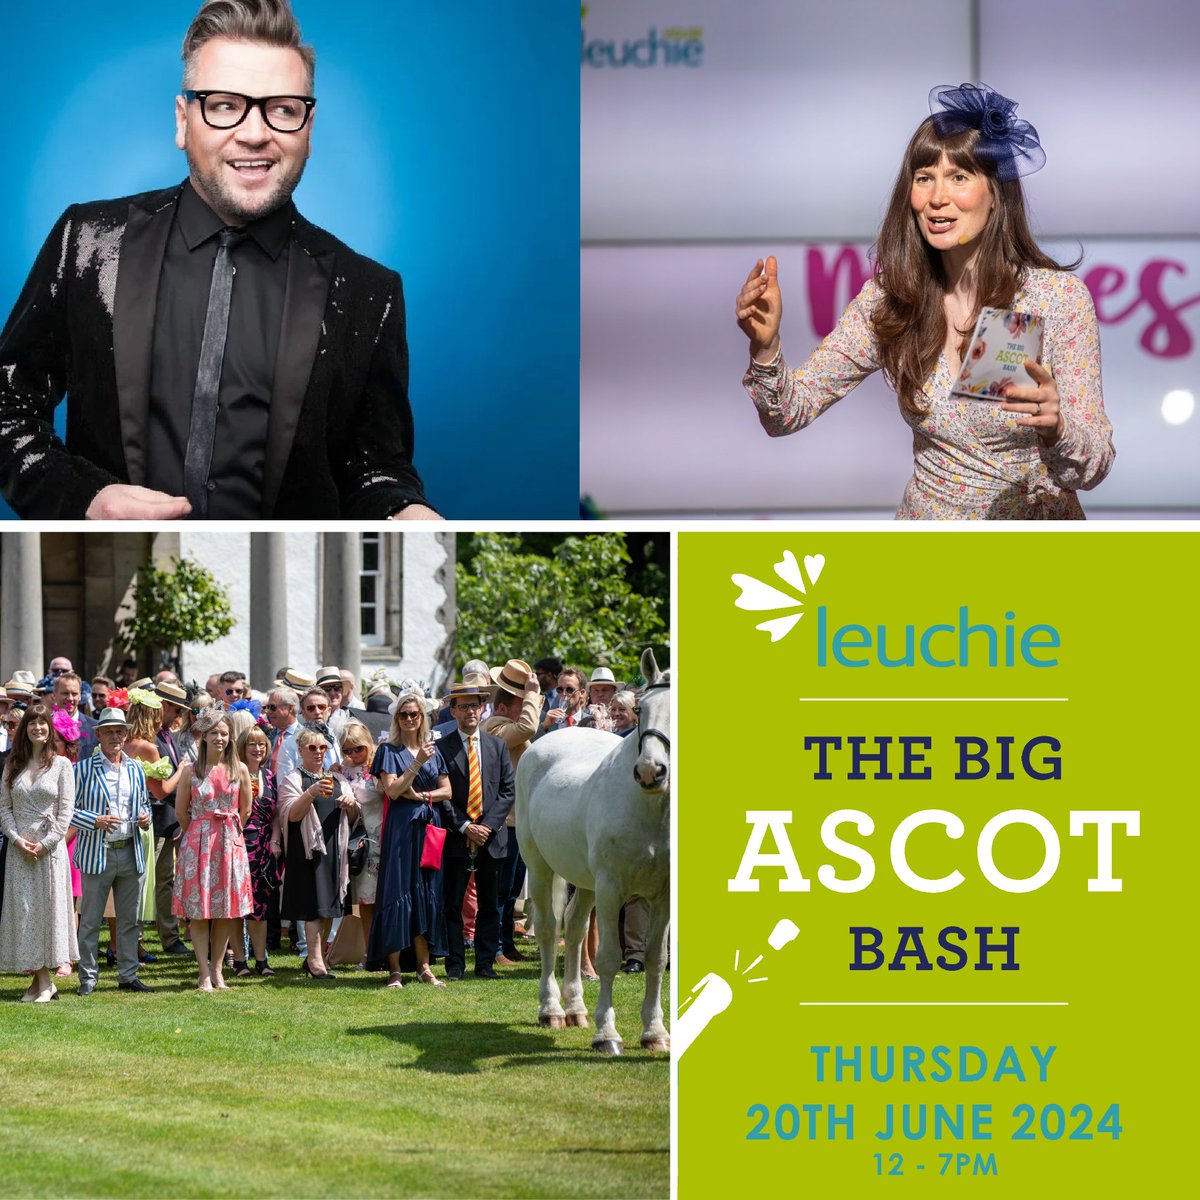 Have you booked yet?! 🏇🥳 Our hosts @natasharadio and @mredwardreid are excited to be entertaining you at #TheBigAscotBash, our Ascot-themed fundraiser @PrestonfieldHH on Thursday, 20th June! Limited tables available. Book now to avoid disappointment leuchiehouse.org.uk/ascot